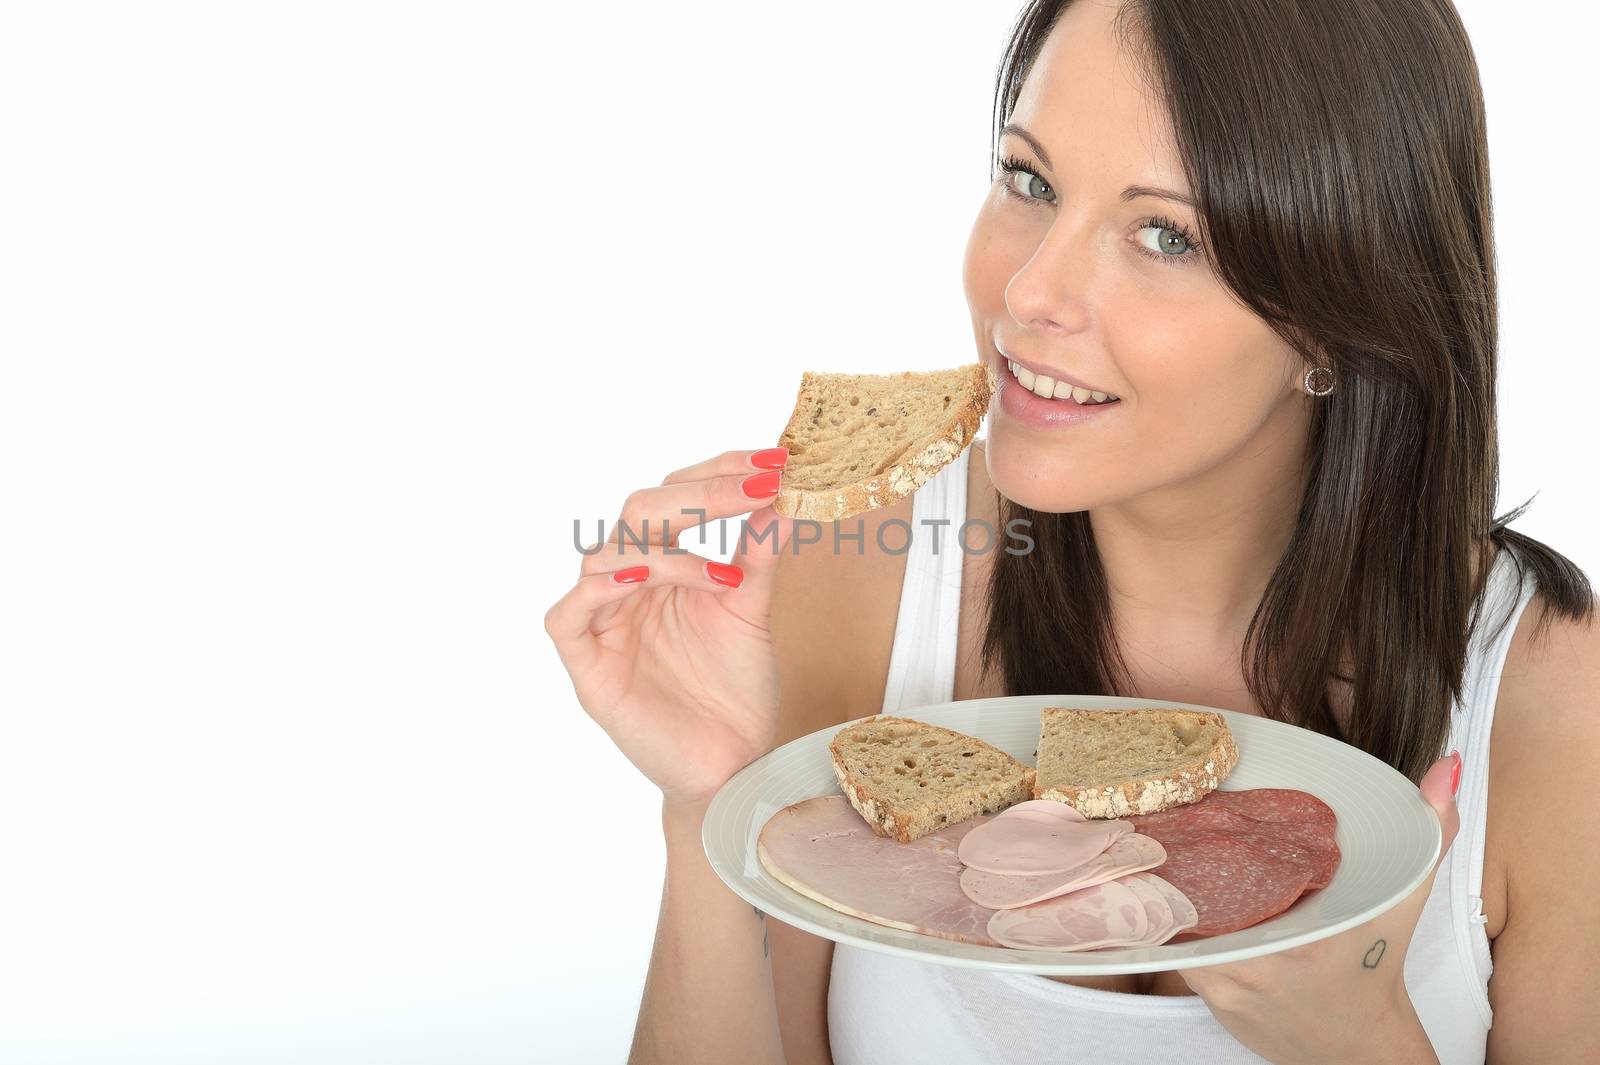 Healthy Young Woman Holding a Typical Norwegian Style Cold Buffe by Whiteboxmedia